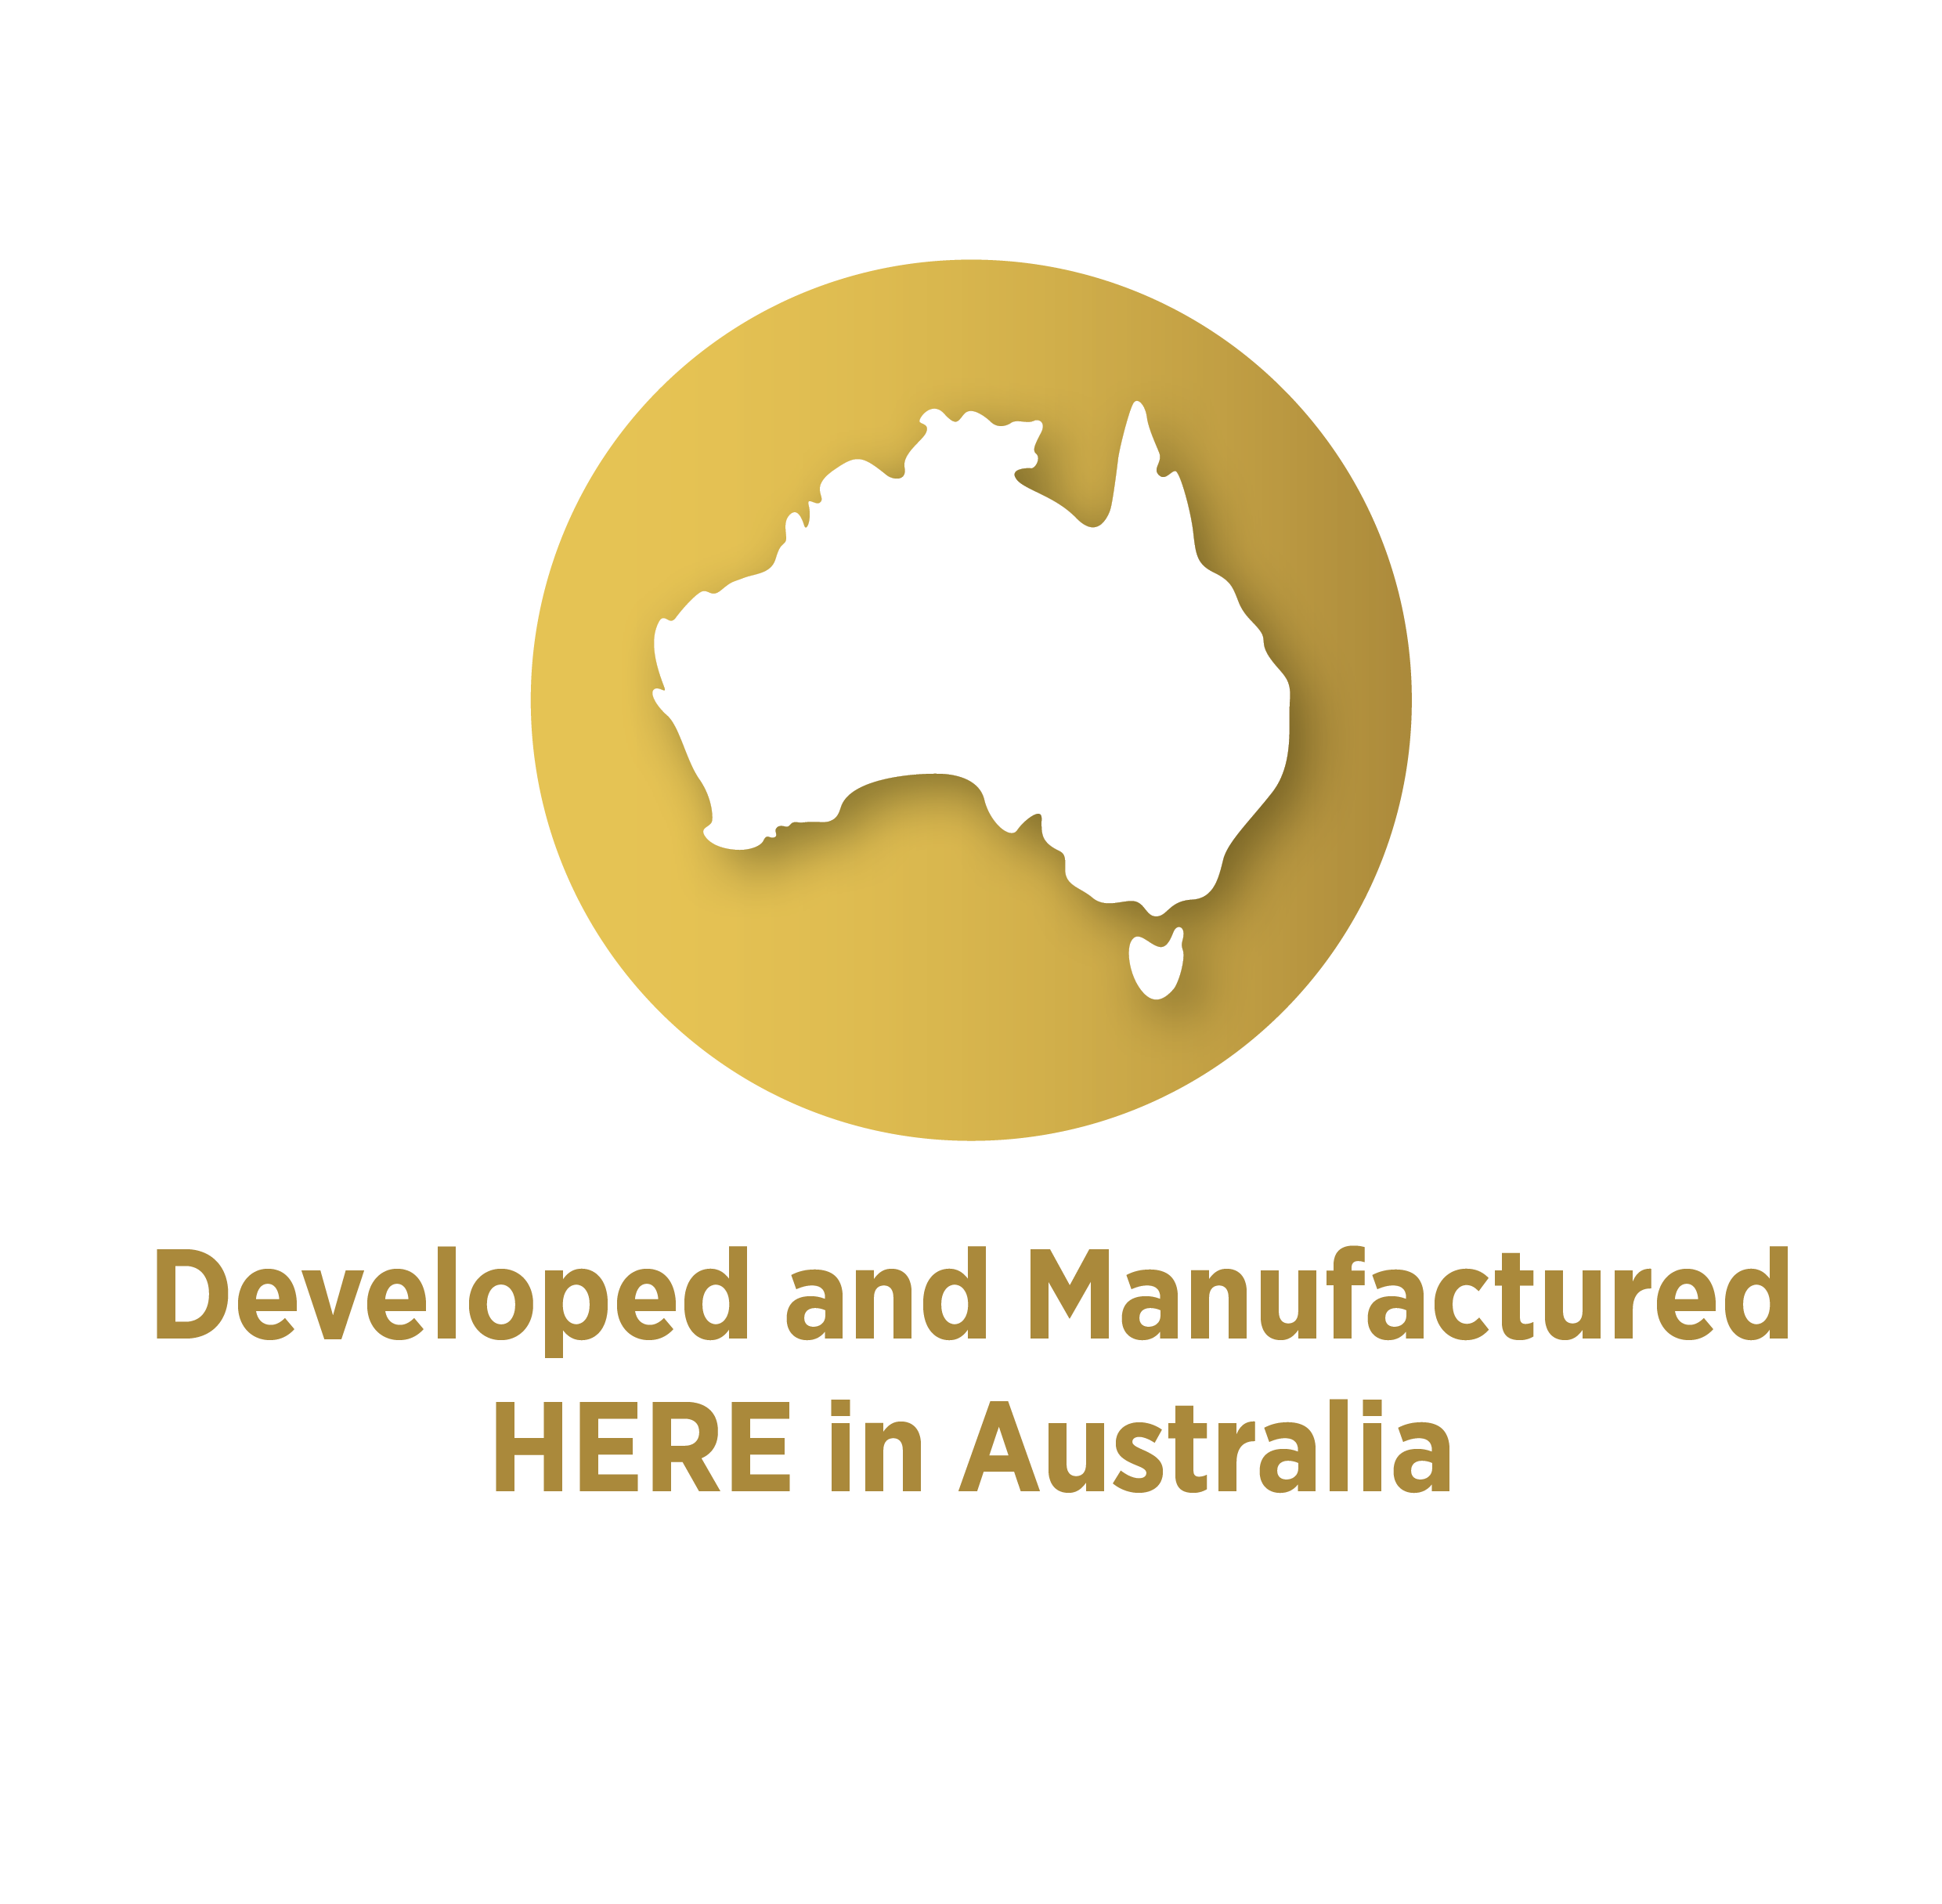 Developed and Manufactured HERE in Australia